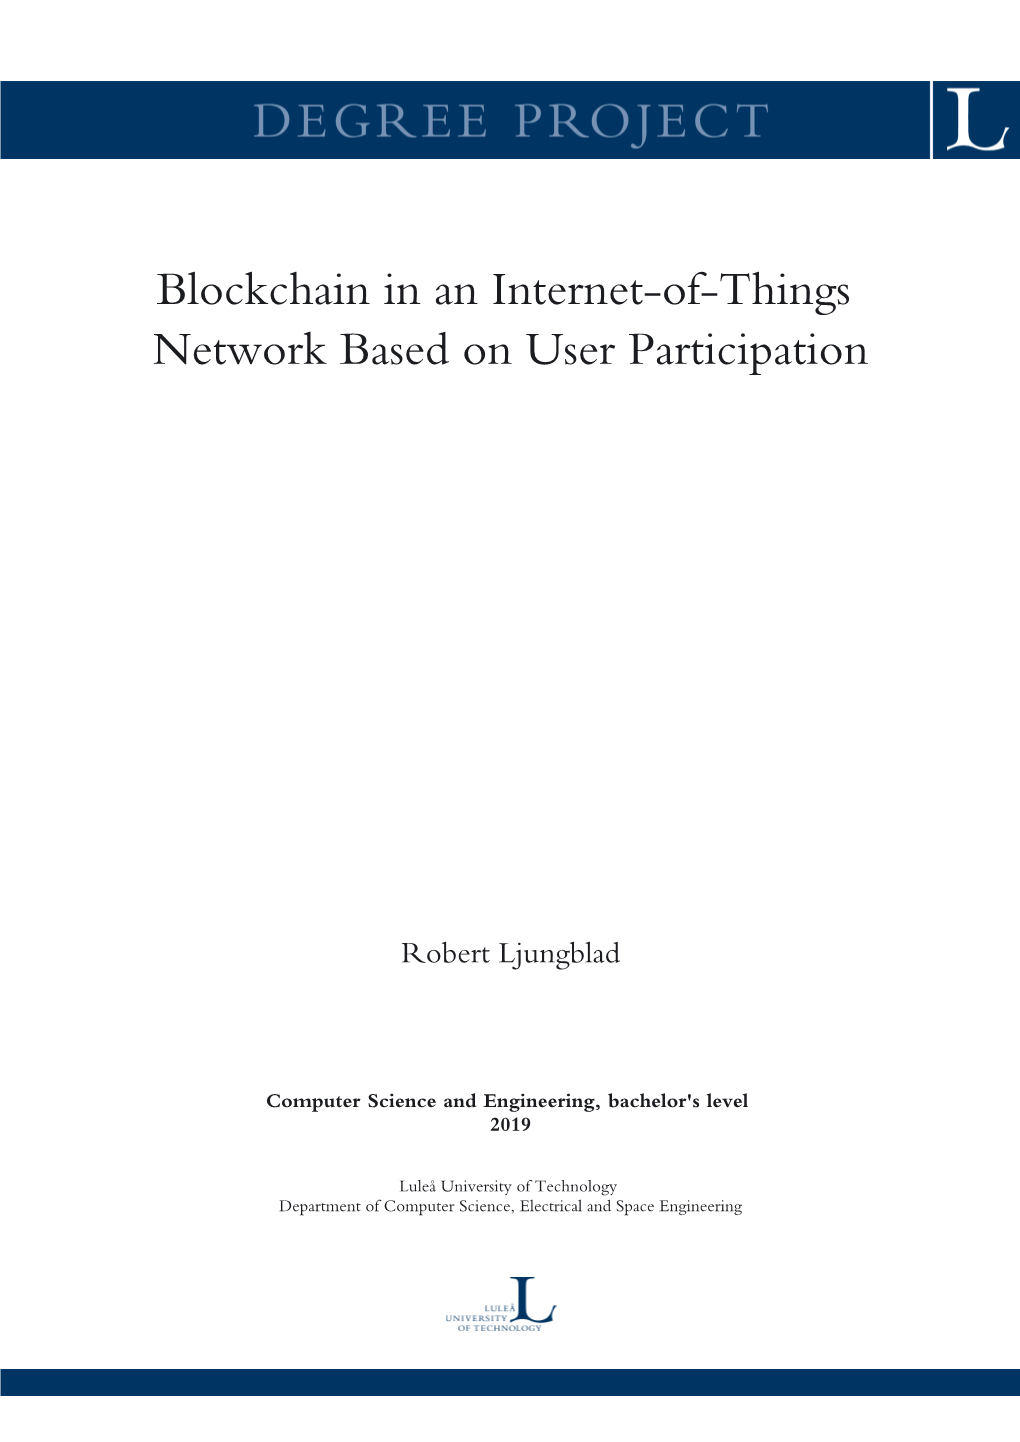 Blockchain in an Internet-Of-Things Network Based on User Participation